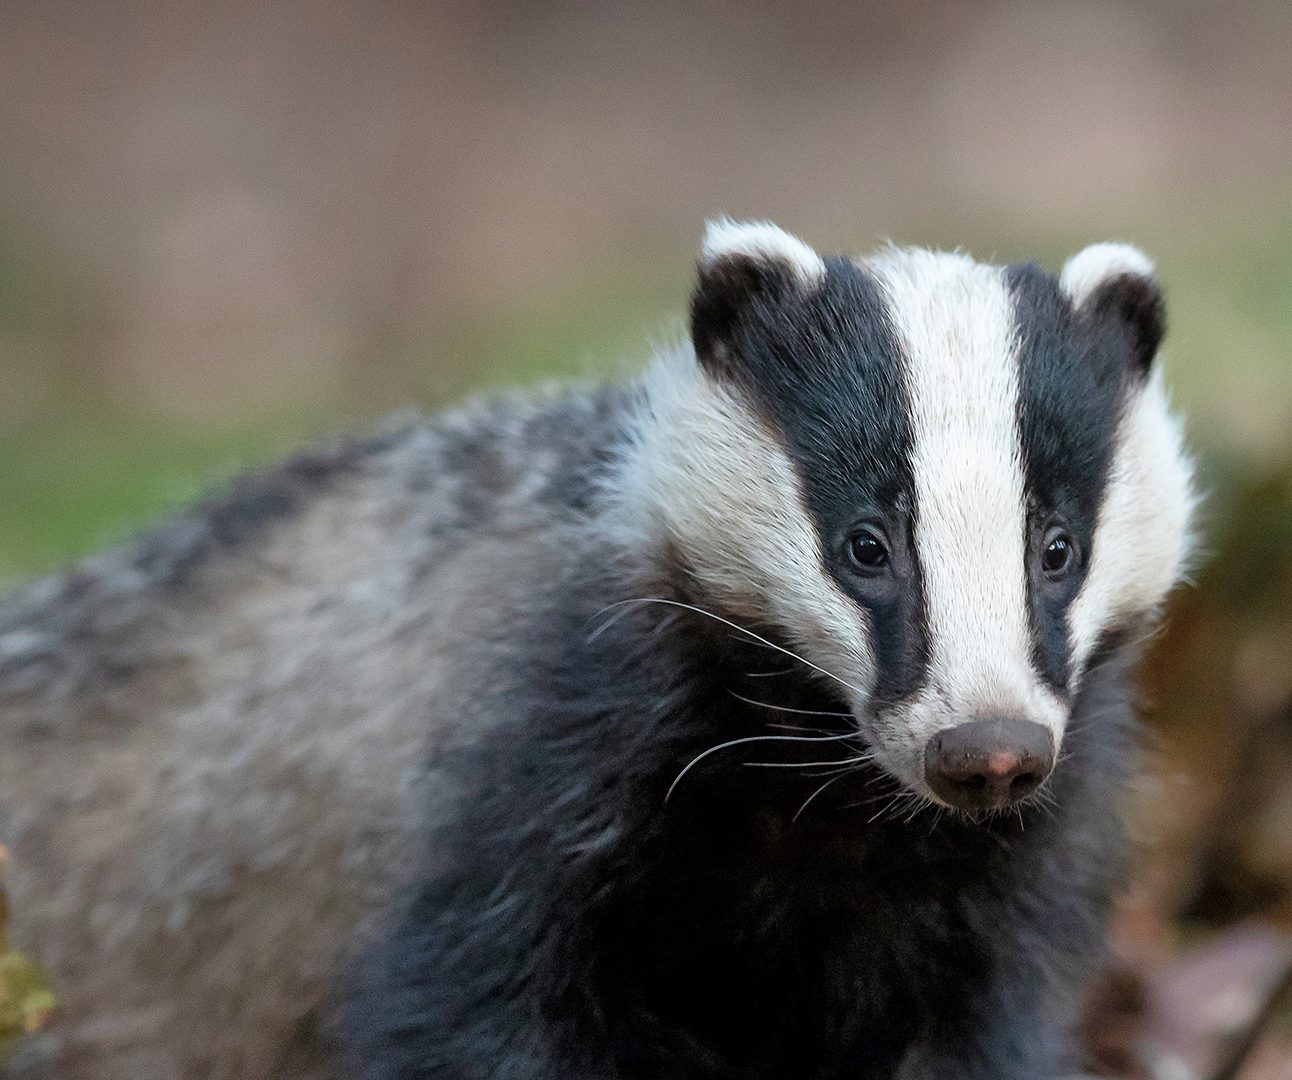 Close up of a badger standing up facing the camera